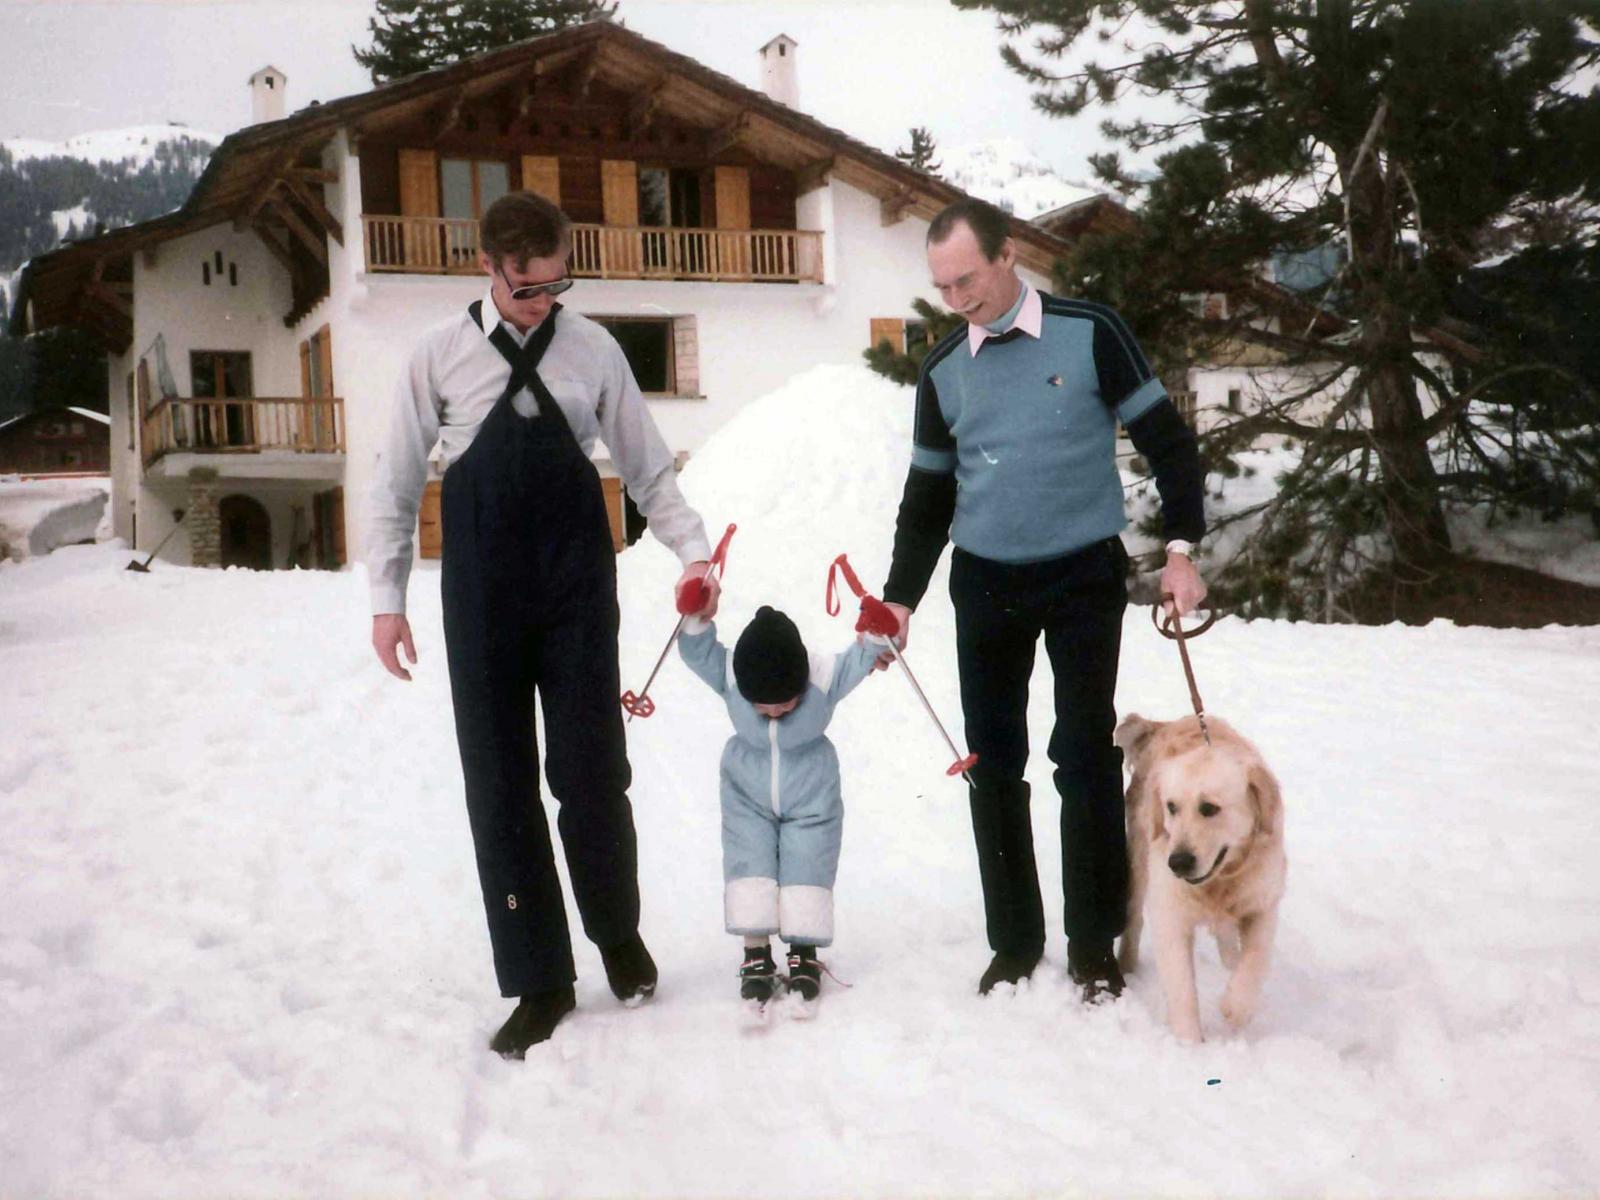 Three generations on a ski holiday in 1983 